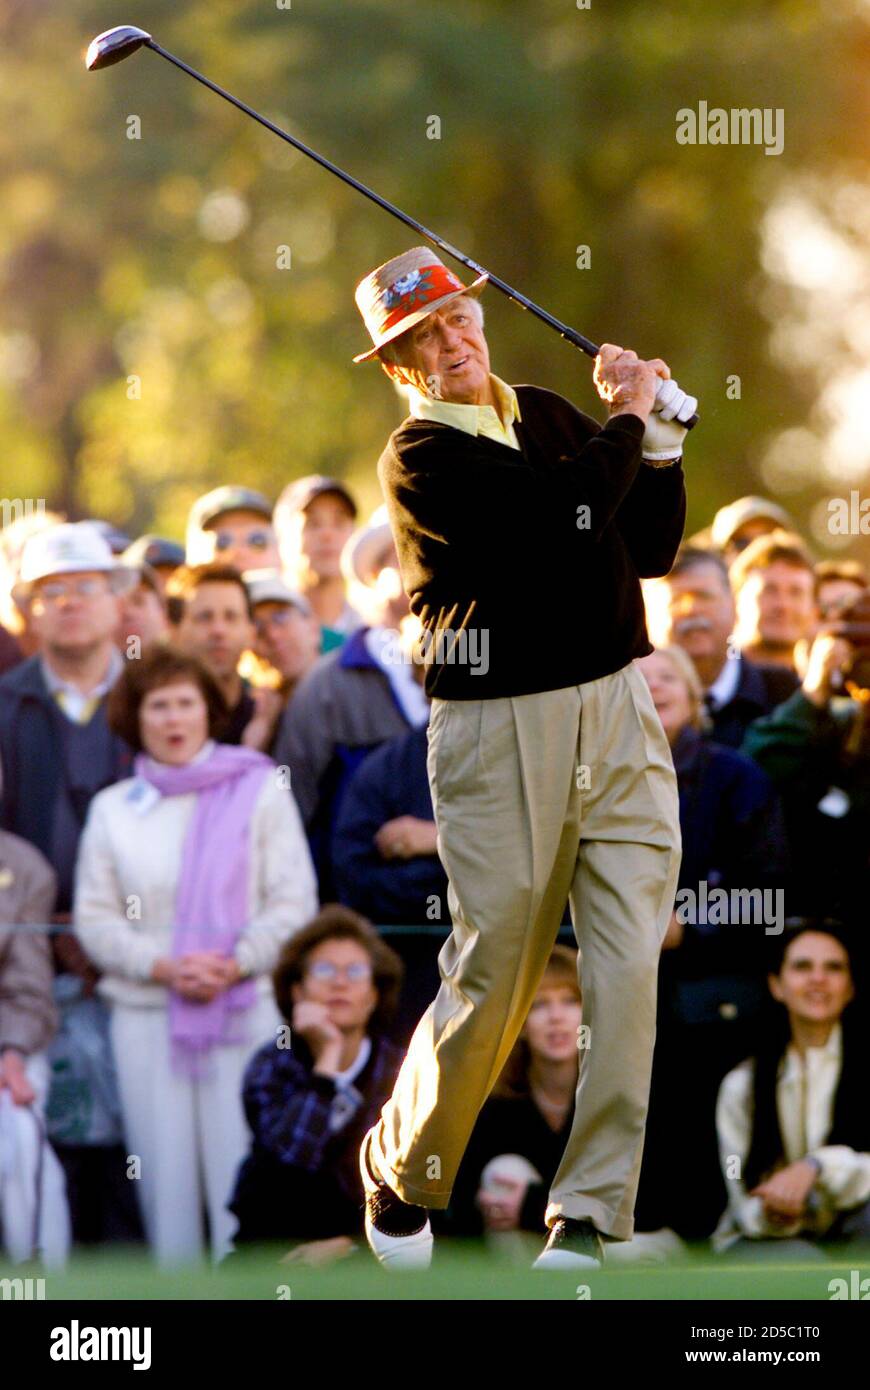 Golf legend Sam Snead tees off on the first hole of Augusta National to  ceremonially start the 2000 Masters golf tournament April 6. Snead and  Byron Nelson shared the spotlight for the